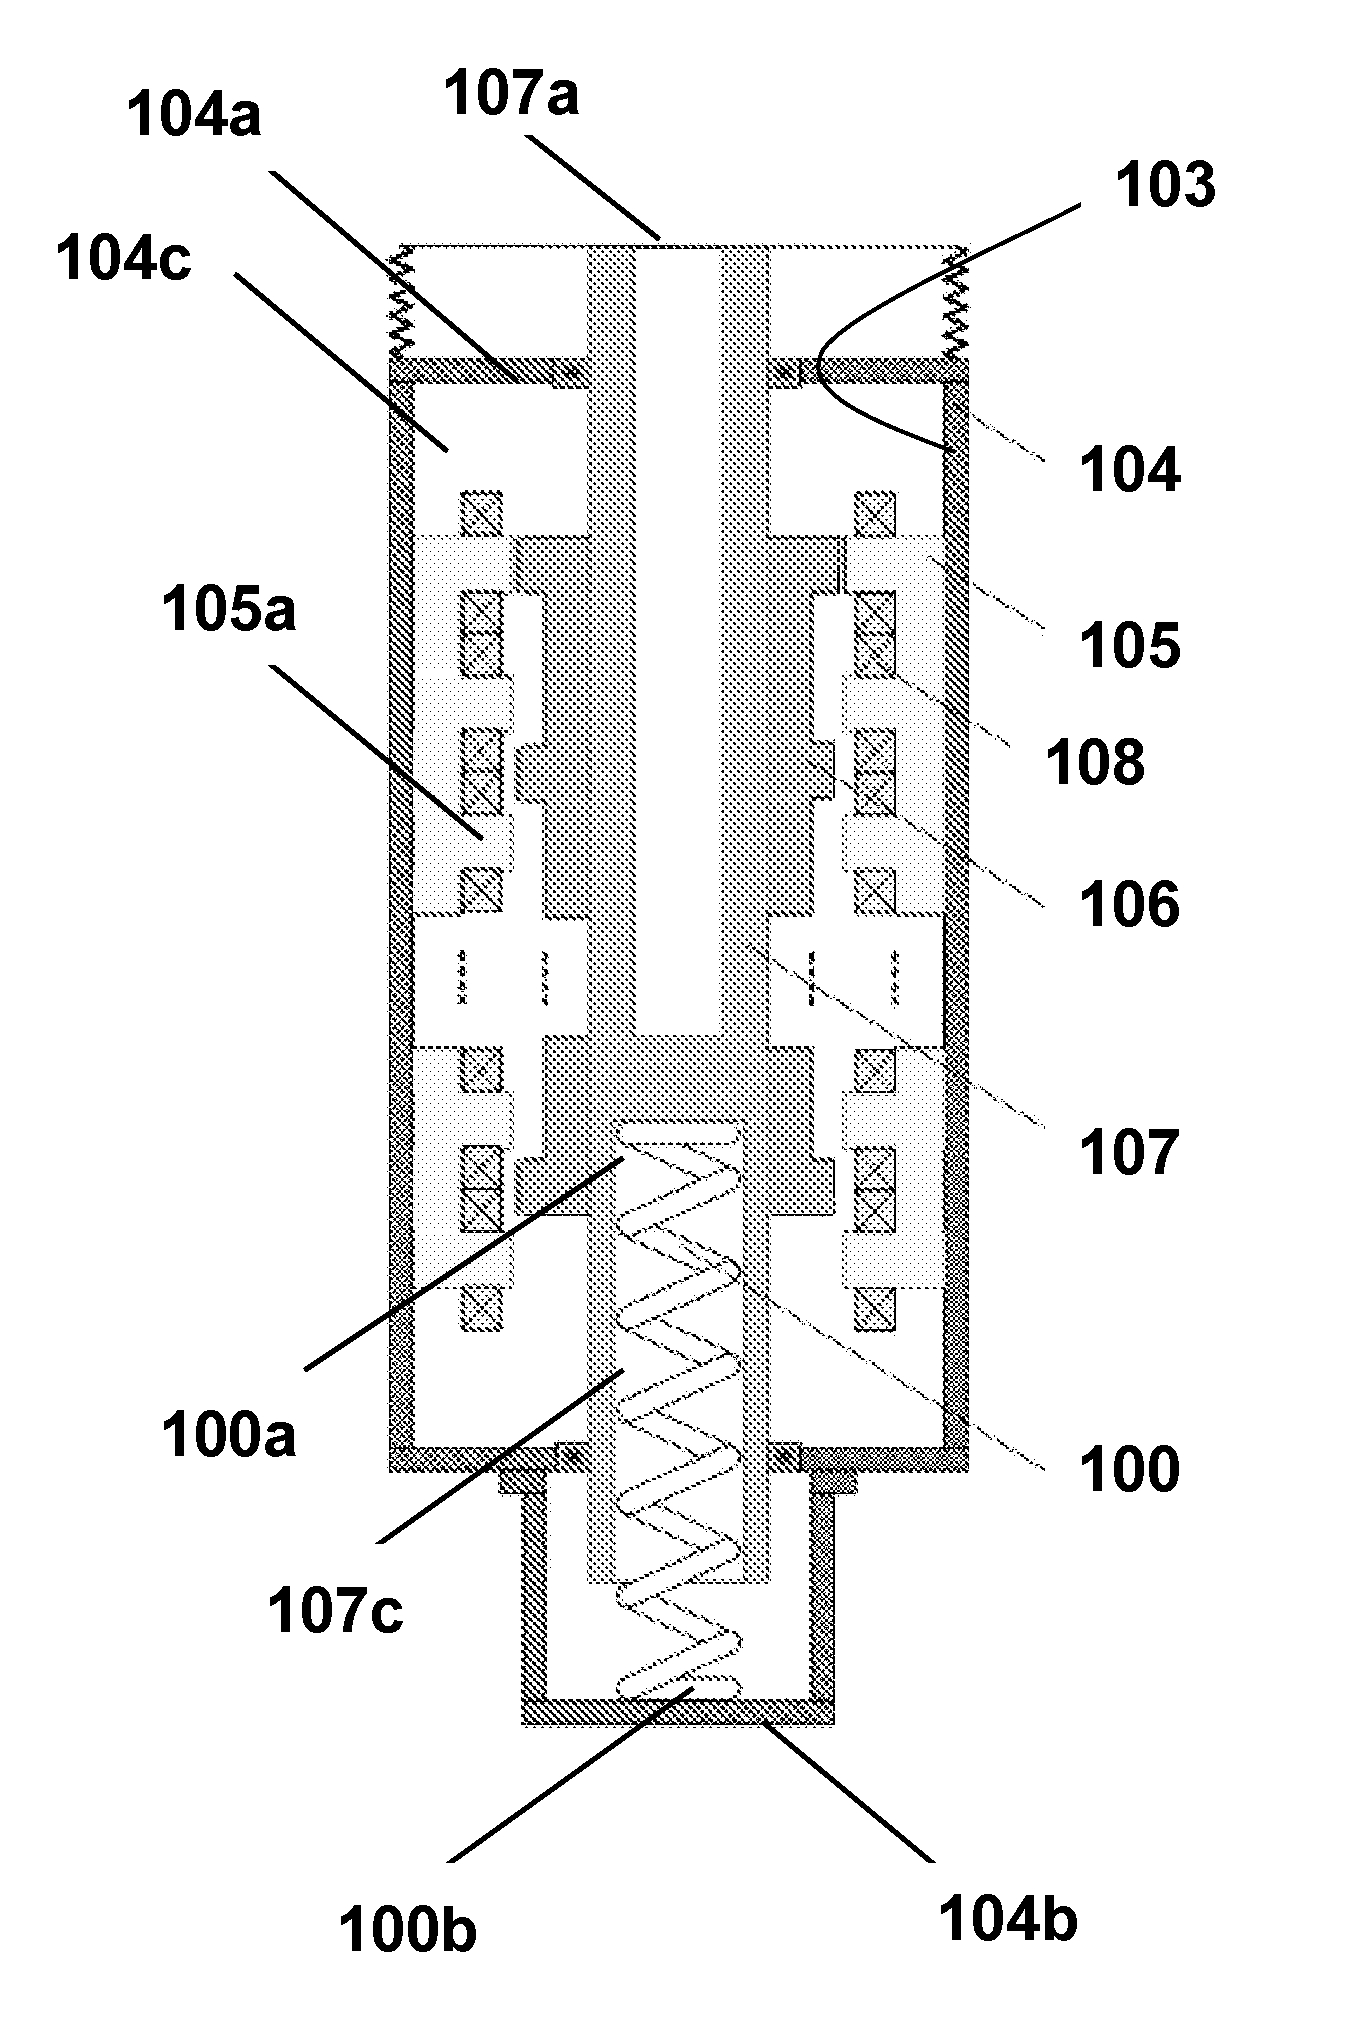 Active suspension system and method